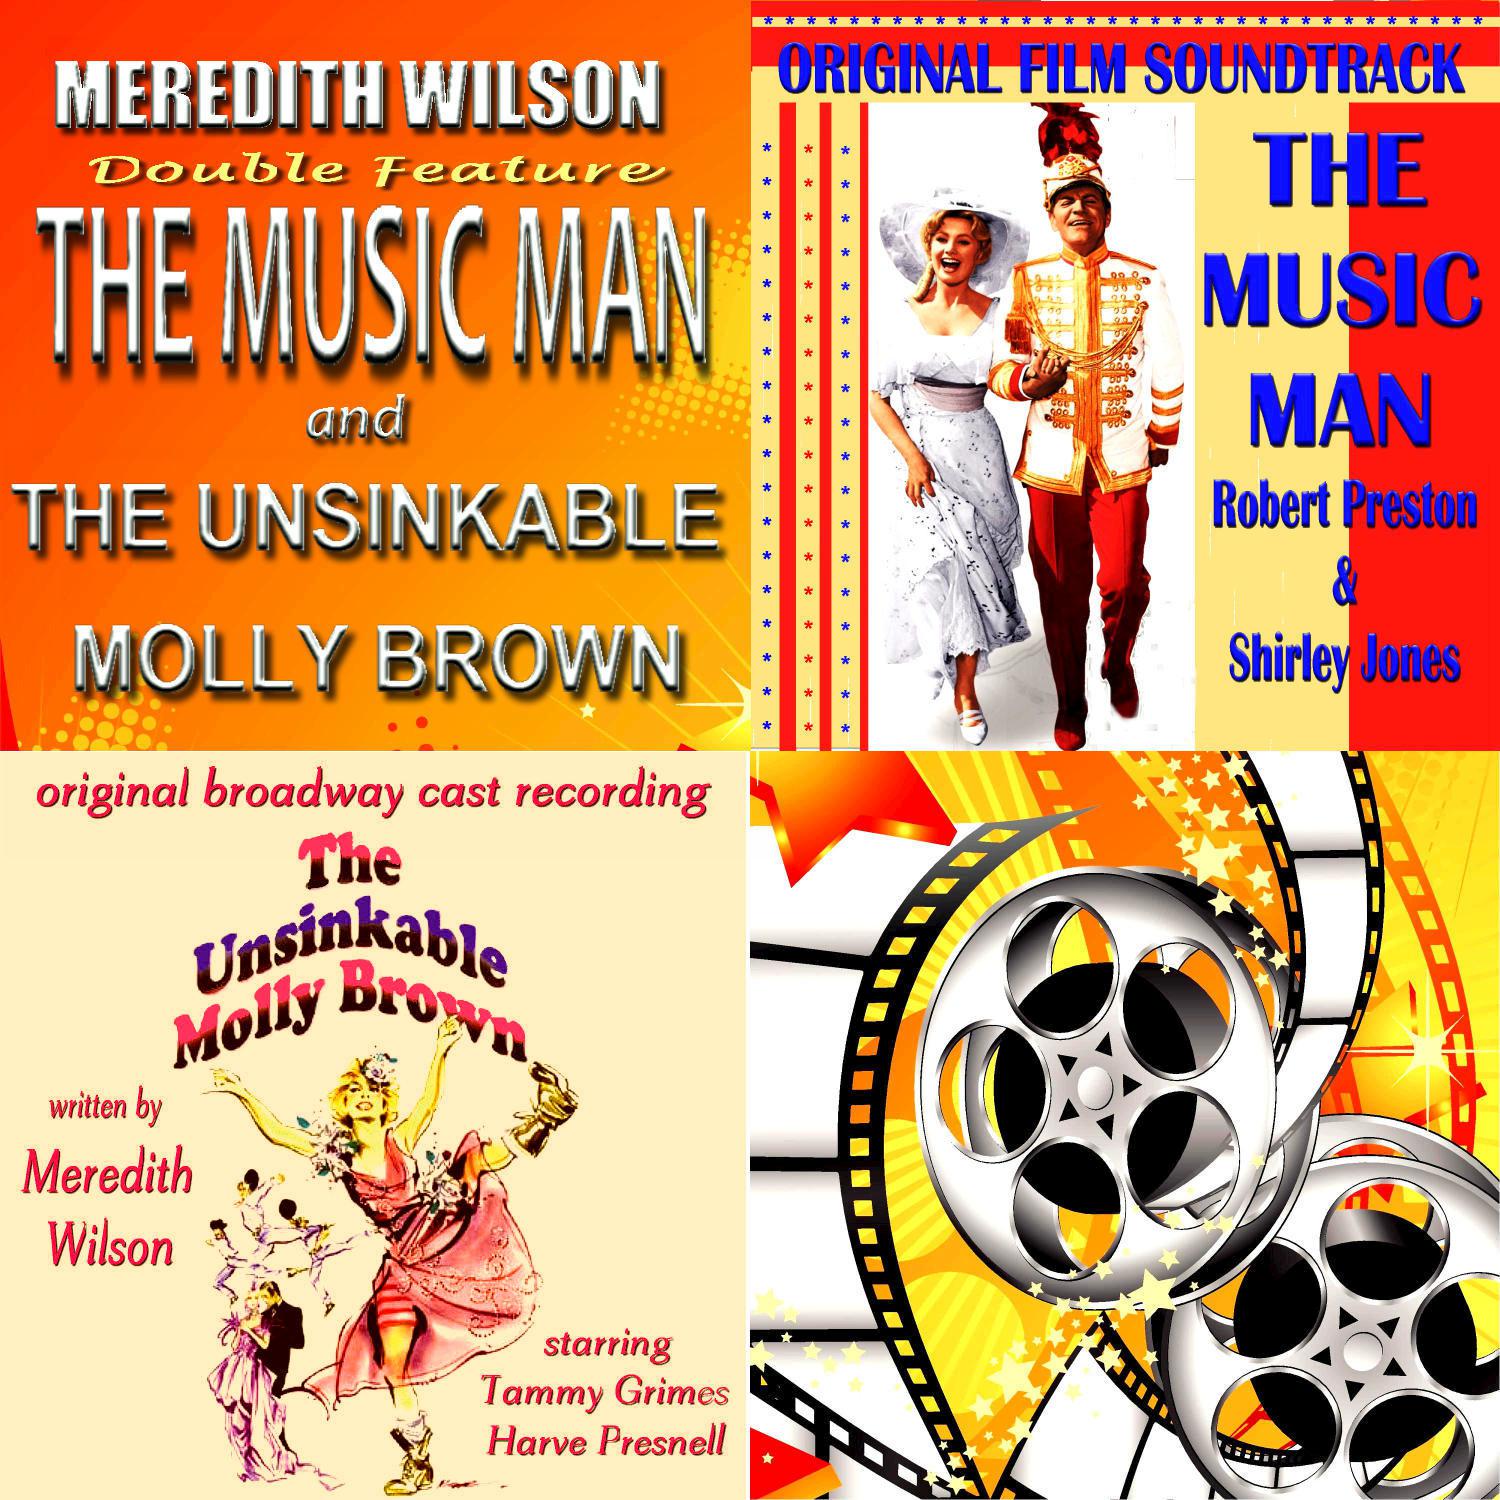 I Ain't Down Yet (Finale) [From "The Unsinkable Molly Brown"]